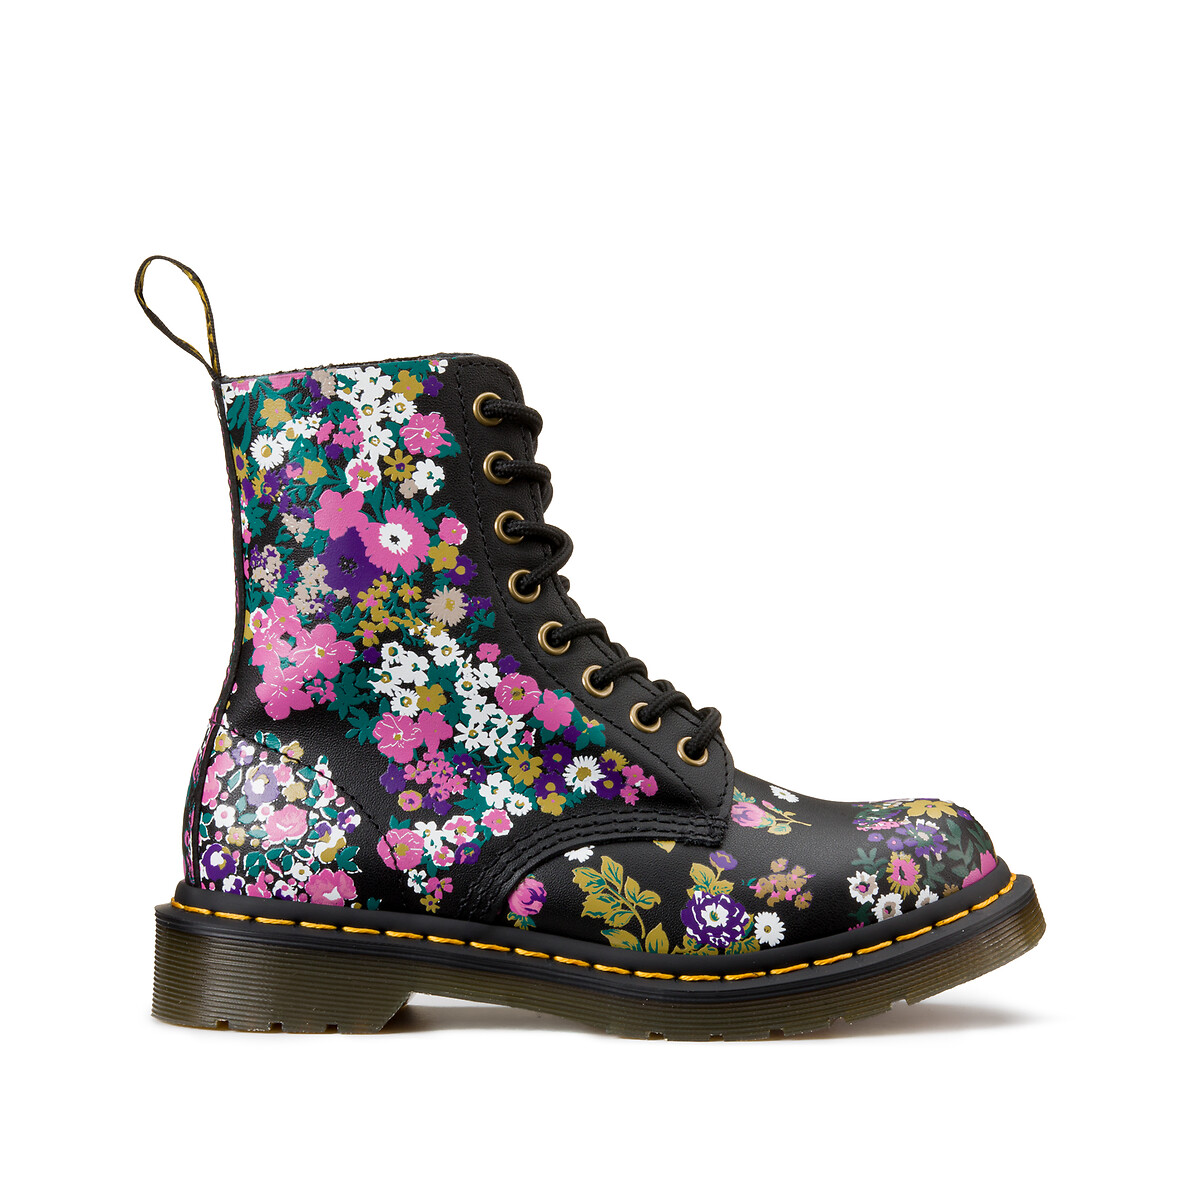 Image of 1460 Pascal Ankle Boots in Floral Print Leather